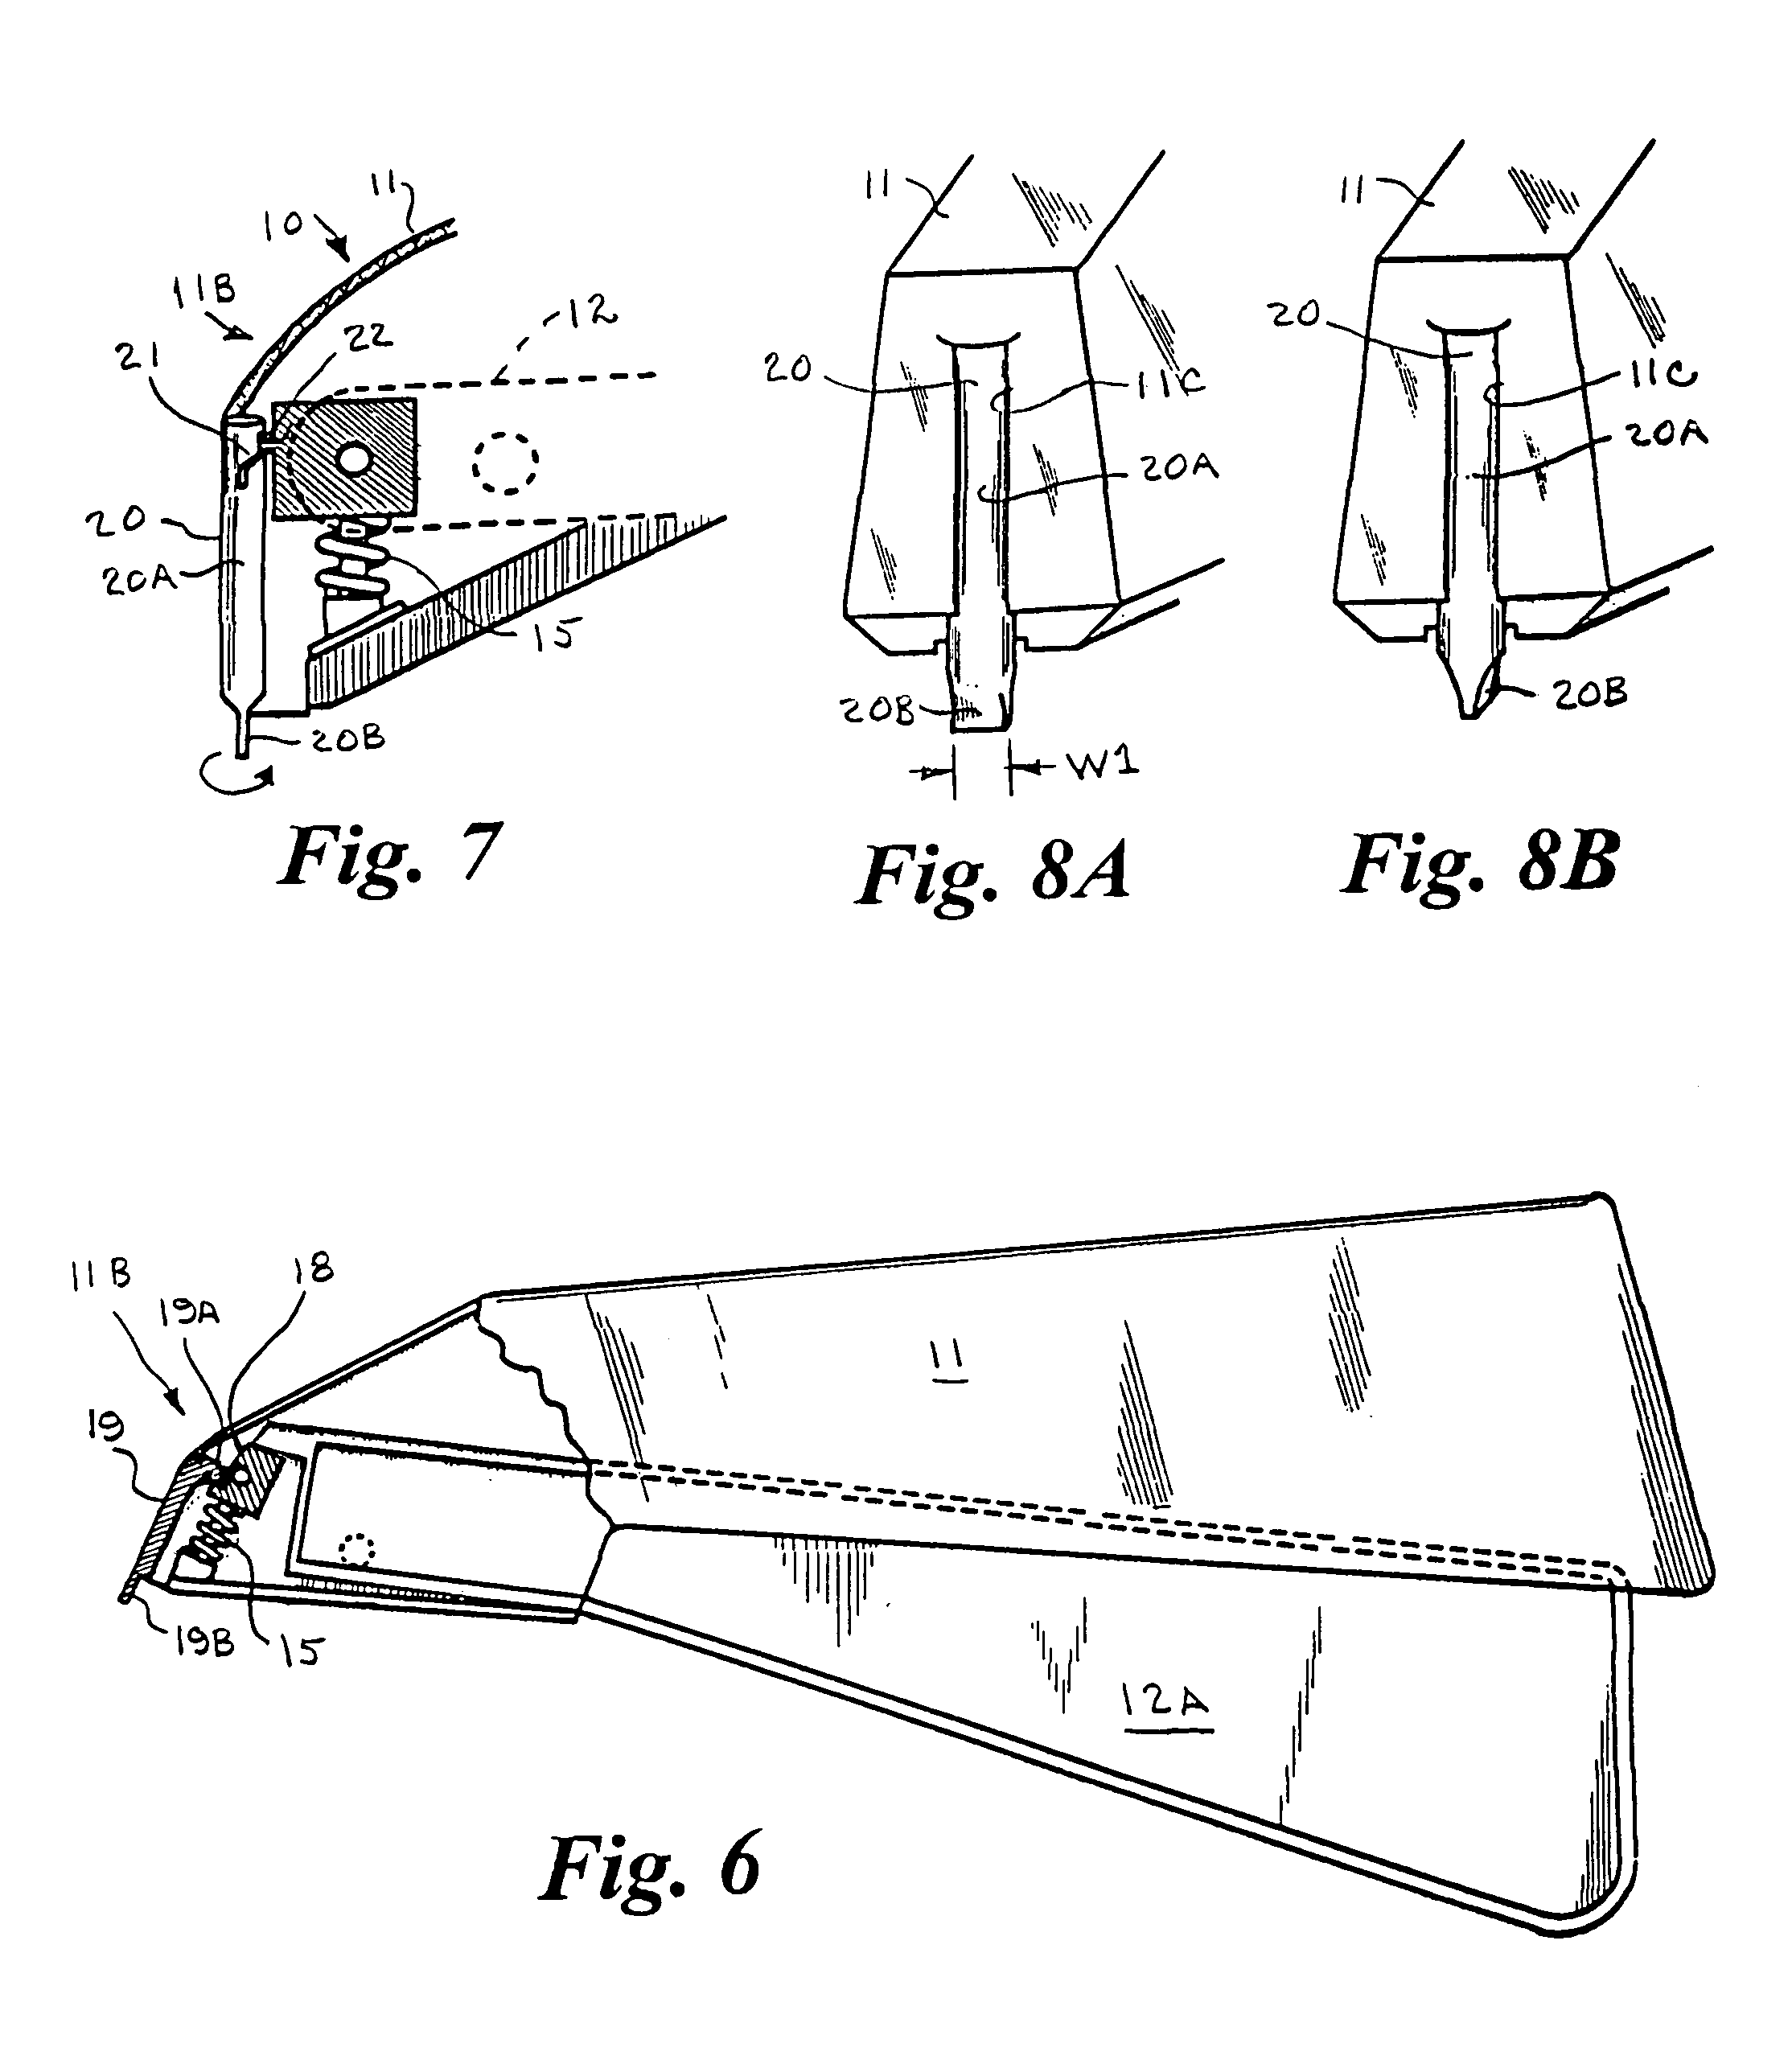 Tissue aligning surgical stapler and method of use